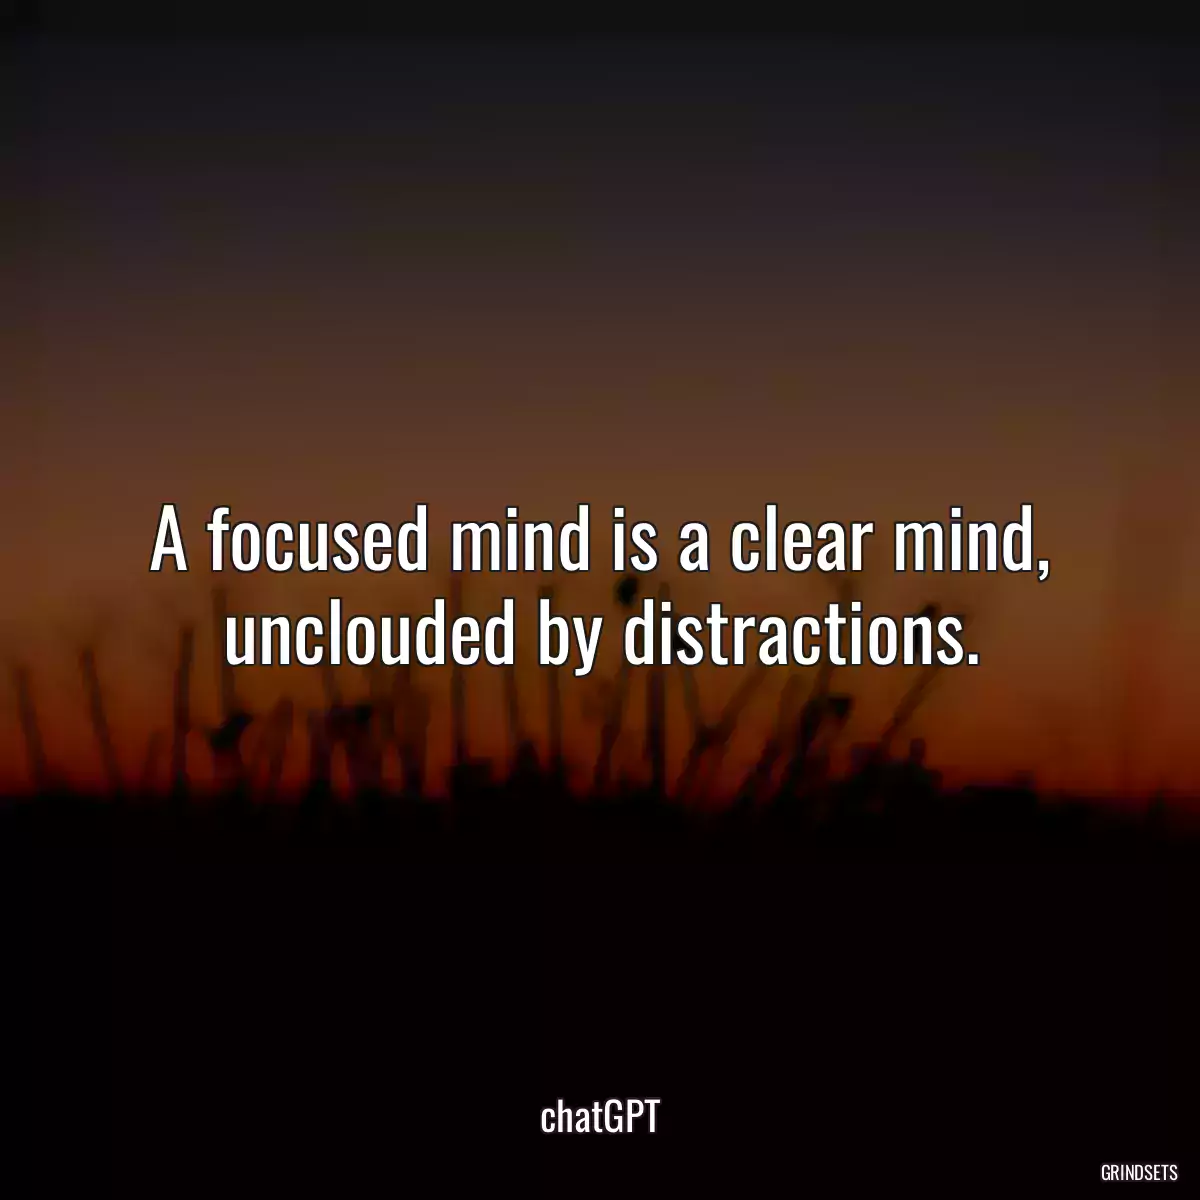 A focused mind is a clear mind, unclouded by distractions.